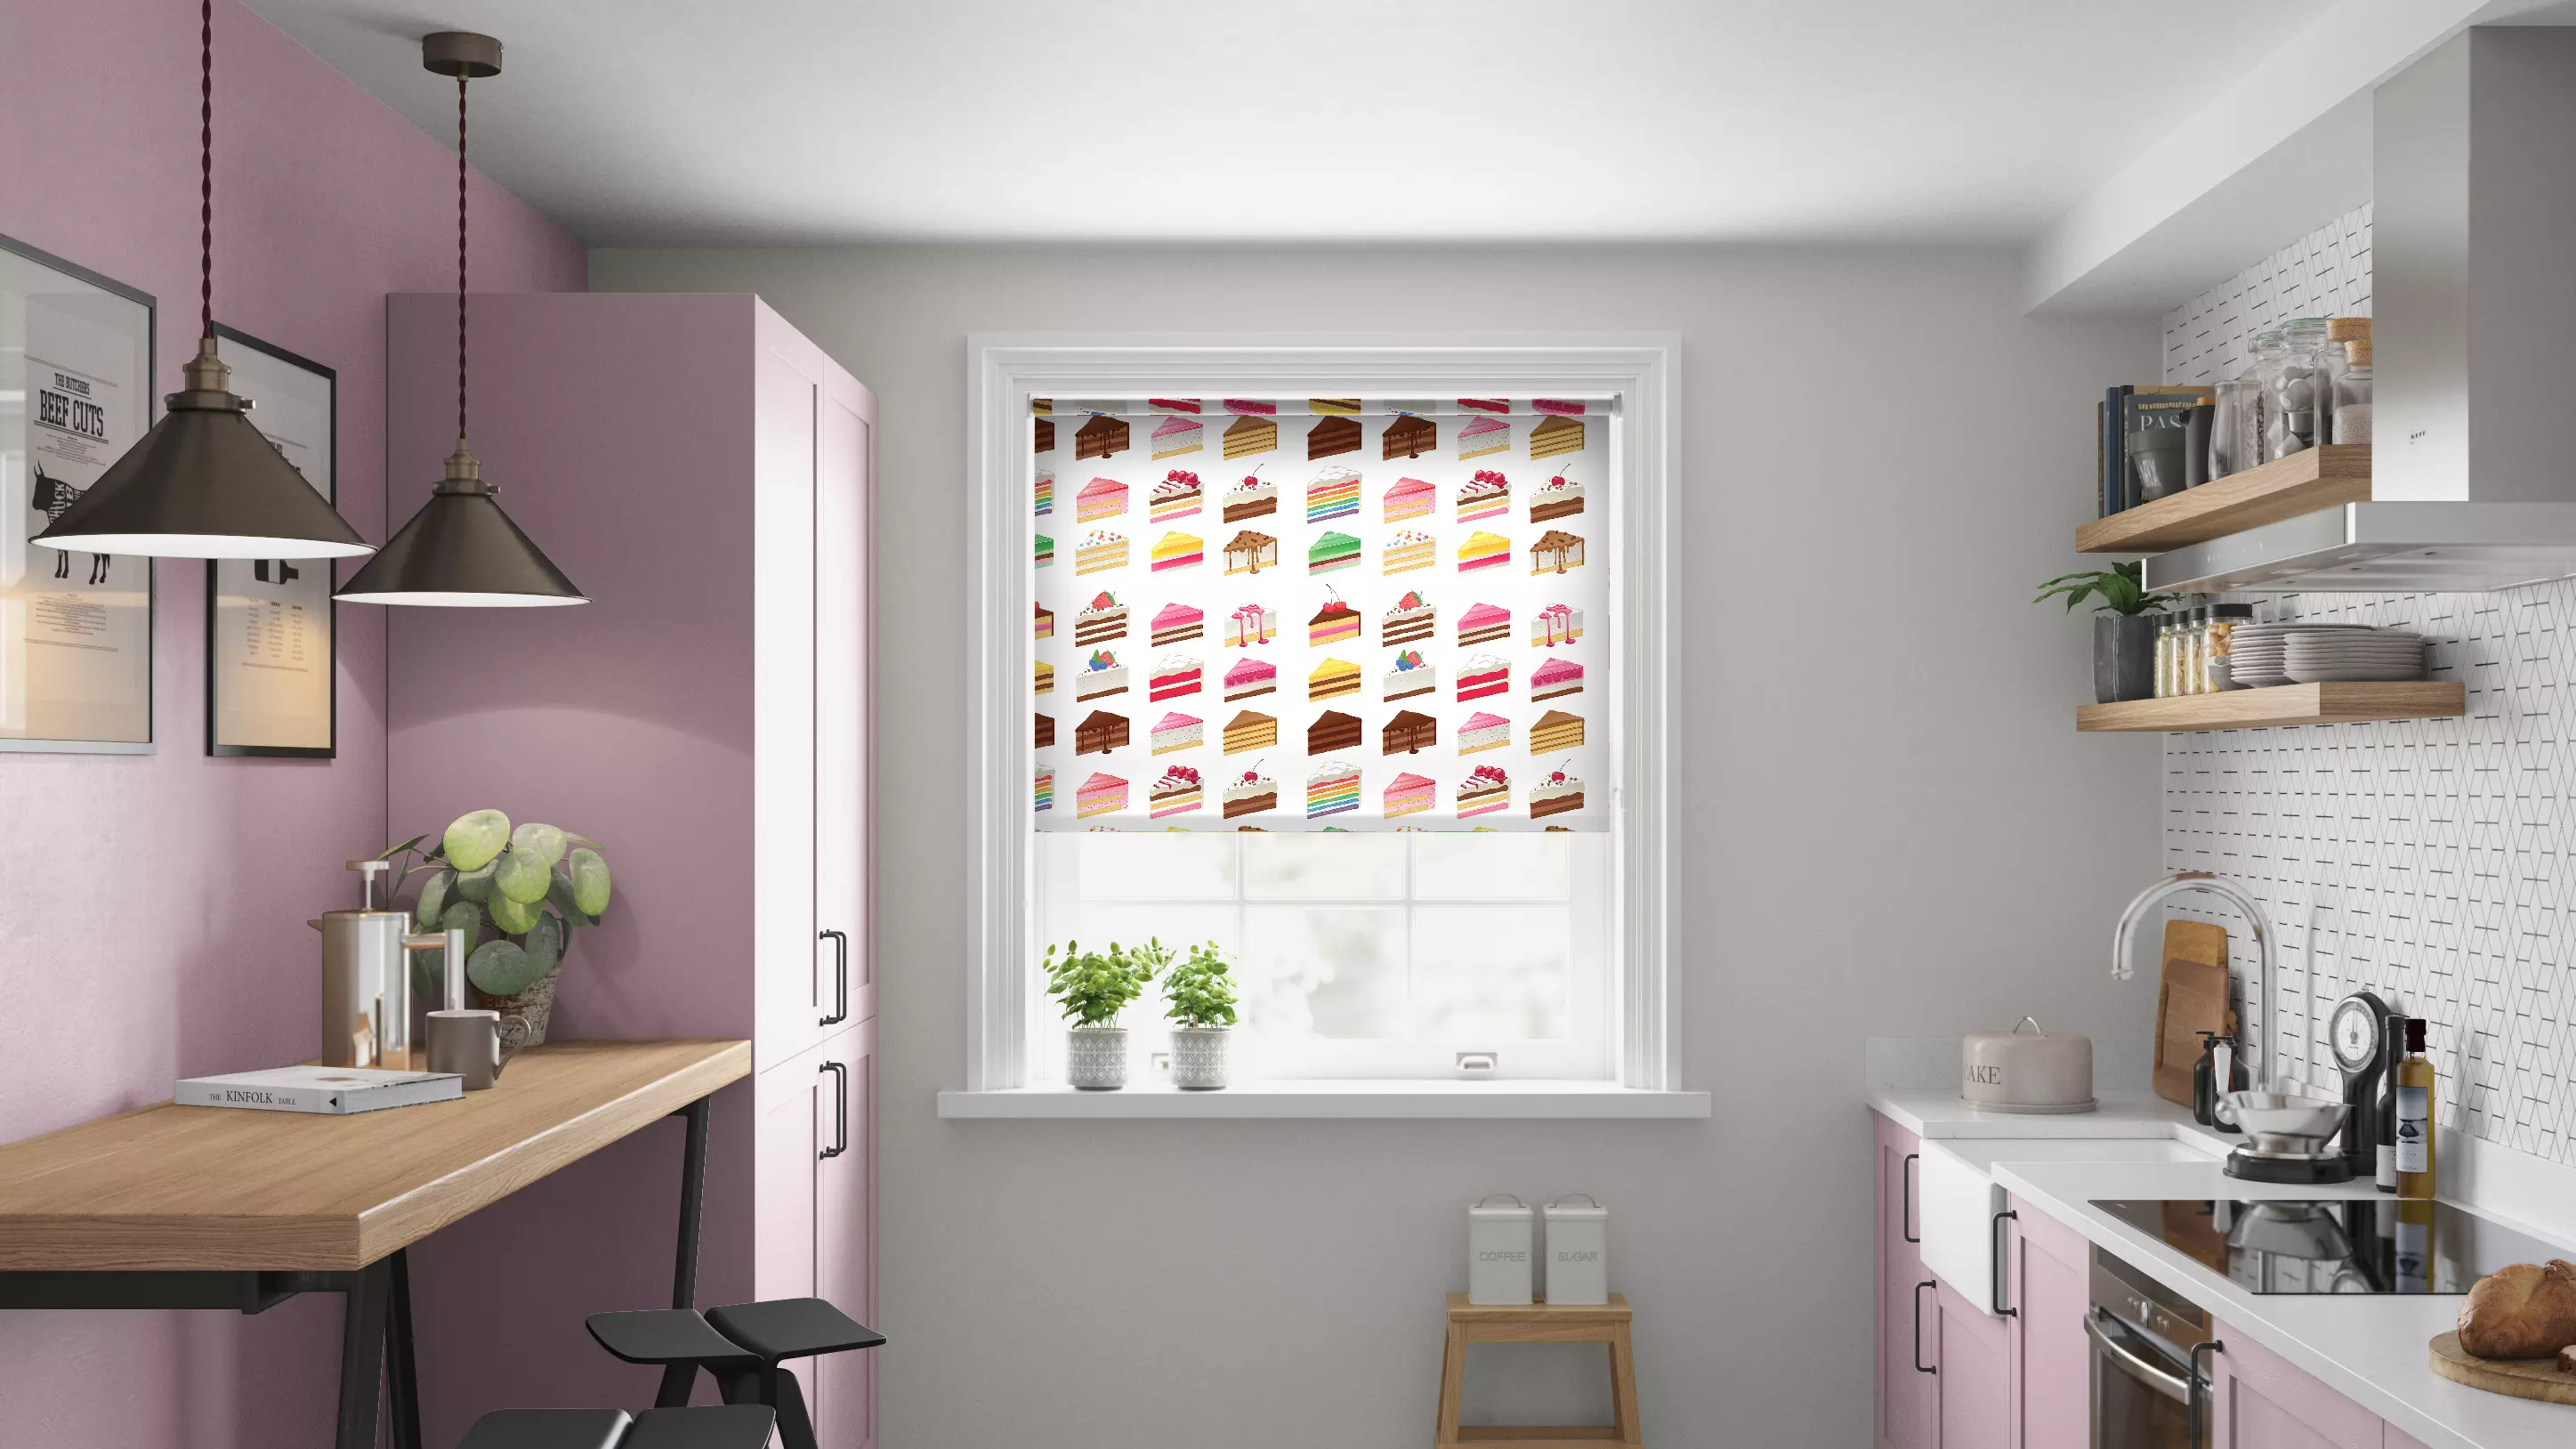 'GBBO' Inspired Blinds Have Landed And TBH They Are Good Enough To Eat